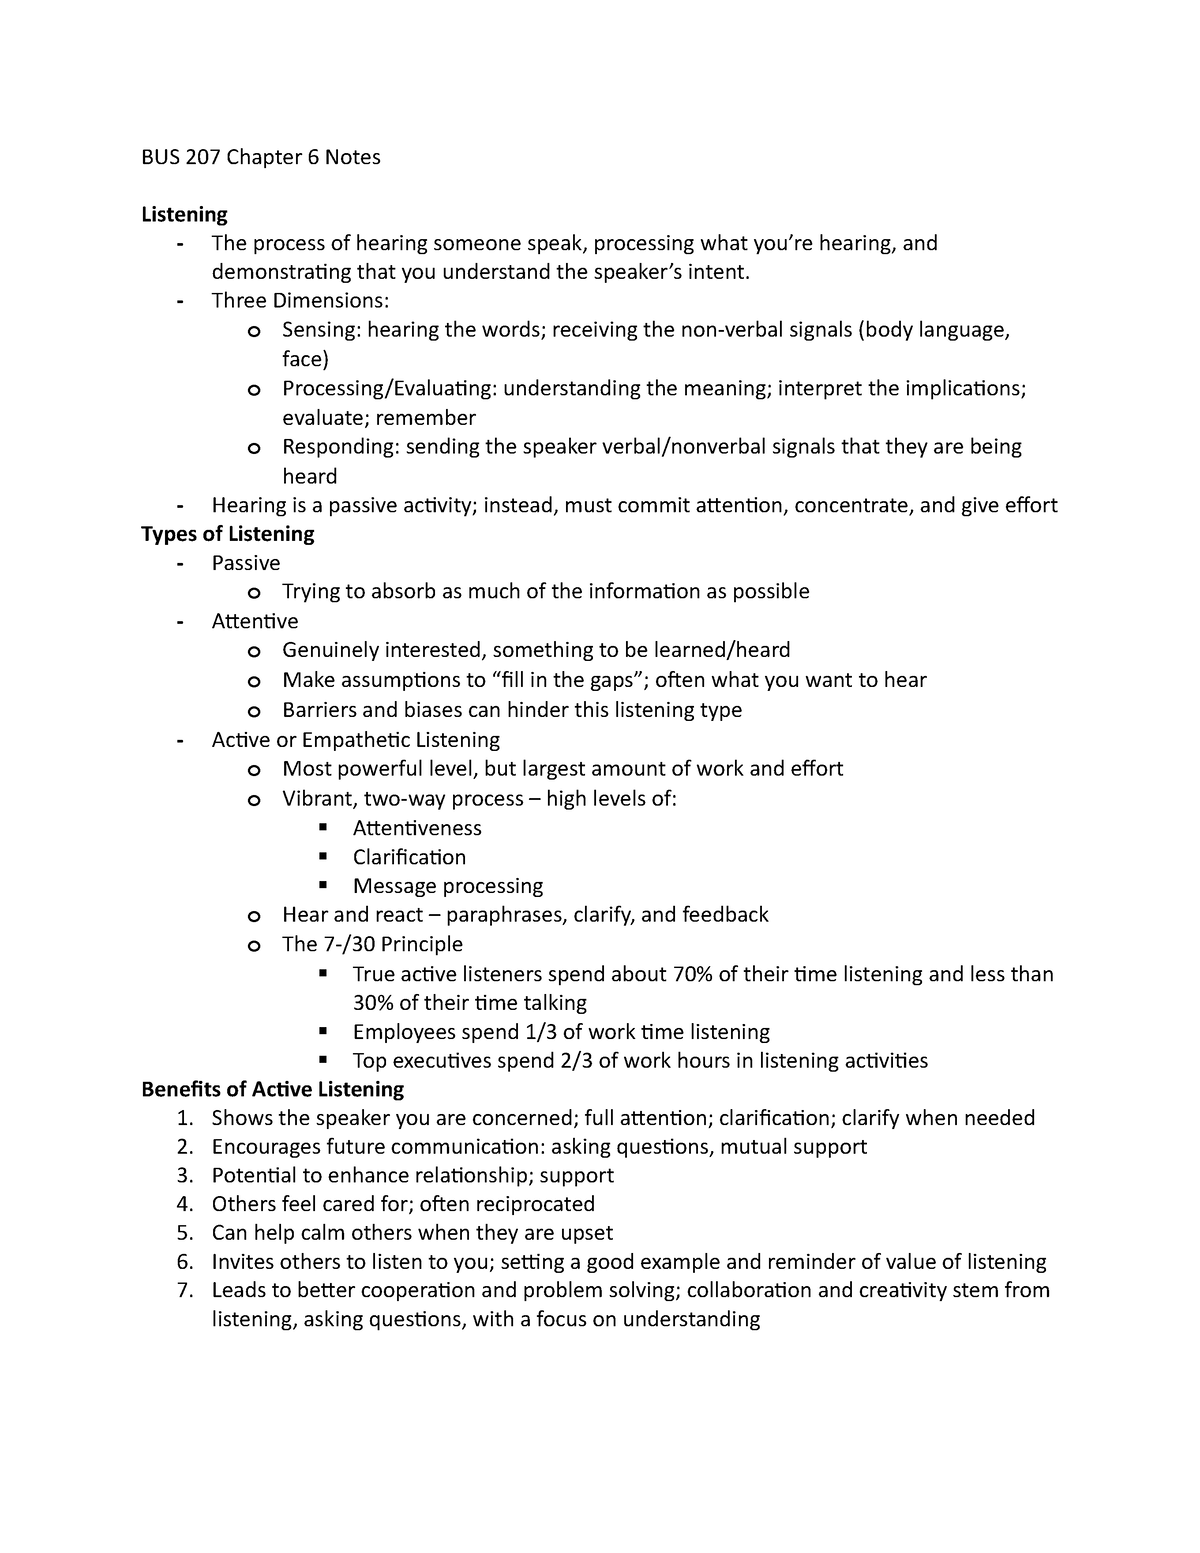 BUS 207 Chapter 6 Notes - Kristen Wilson - BUS 207 Chapter 6 Notes ...